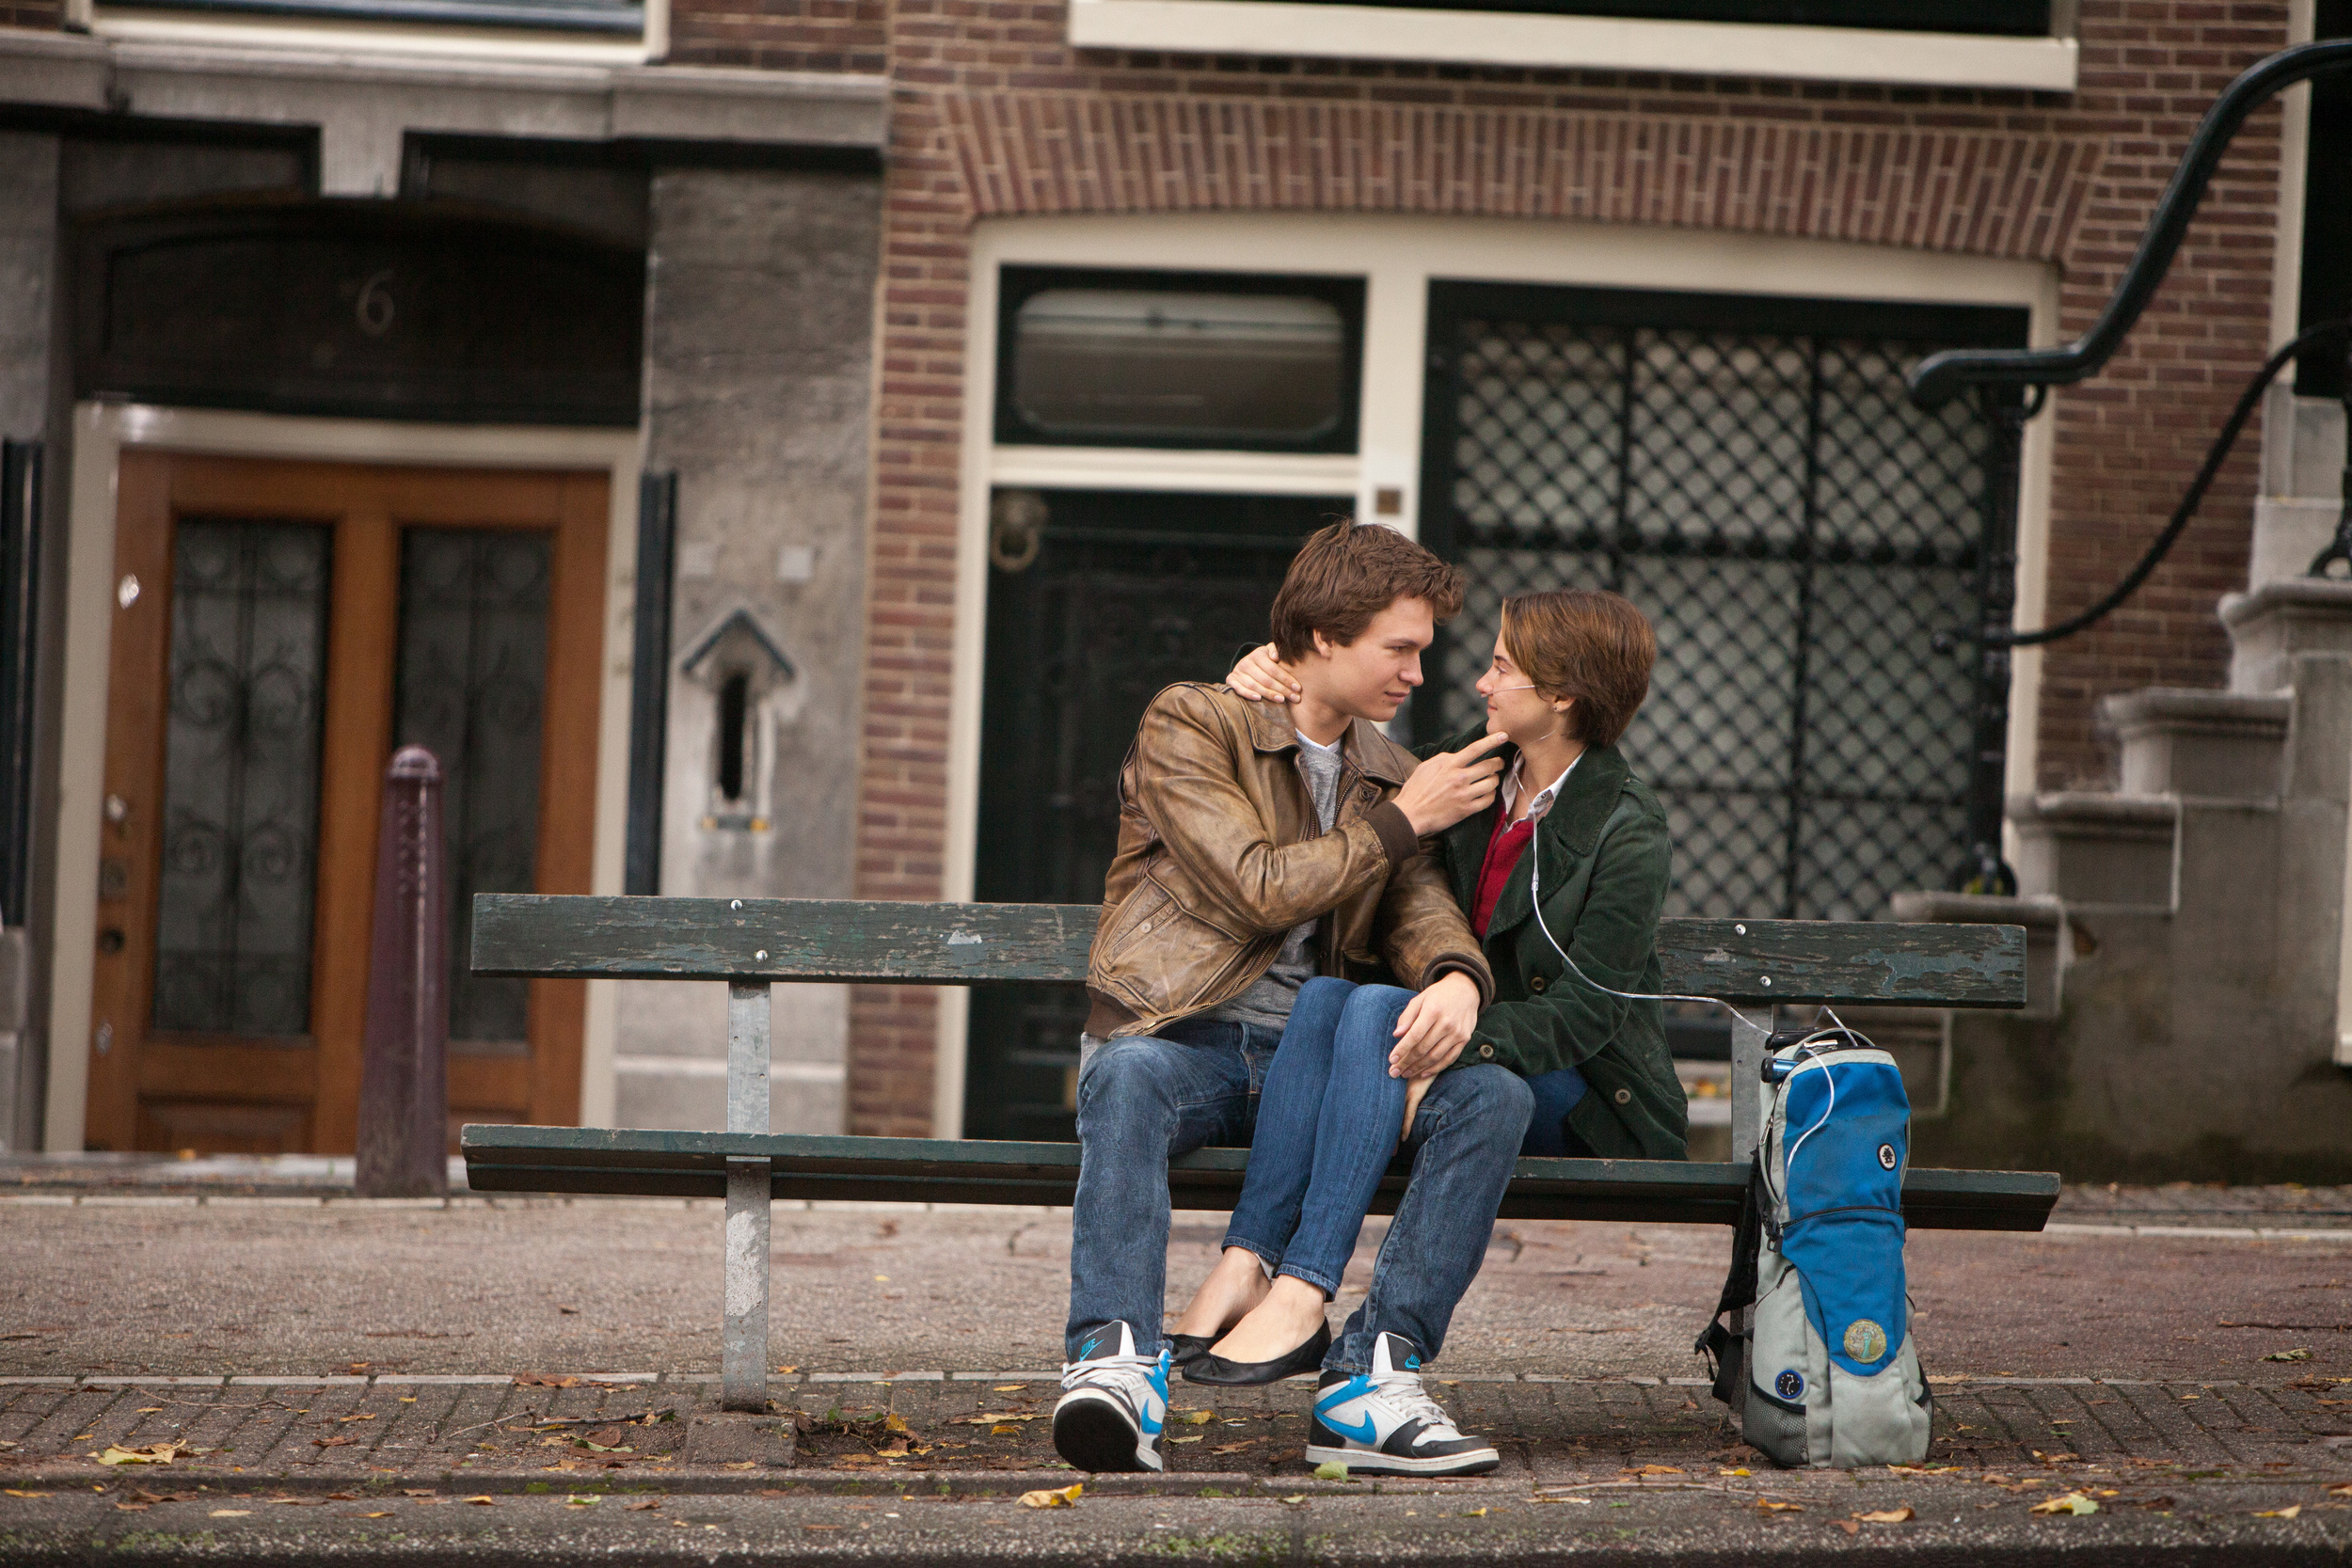 <p><em>The Fault in Our Stars</em> was an emotional read for, well, everyone who read it, and there were plenty of readers who had an attachment to the story. Luckily, they were satisfied by the film adaptation, which brought viewers just as many tears as readers. </p><p><a href='https://www.msn.com/en-us/community/channel/vid-cj9pqbr0vn9in2b6ddcd8sfgpfq6x6utp44fssrv6mc2gtybw0us'>Follow us on MSN to see more of our exclusive entertainment content.</a></p>